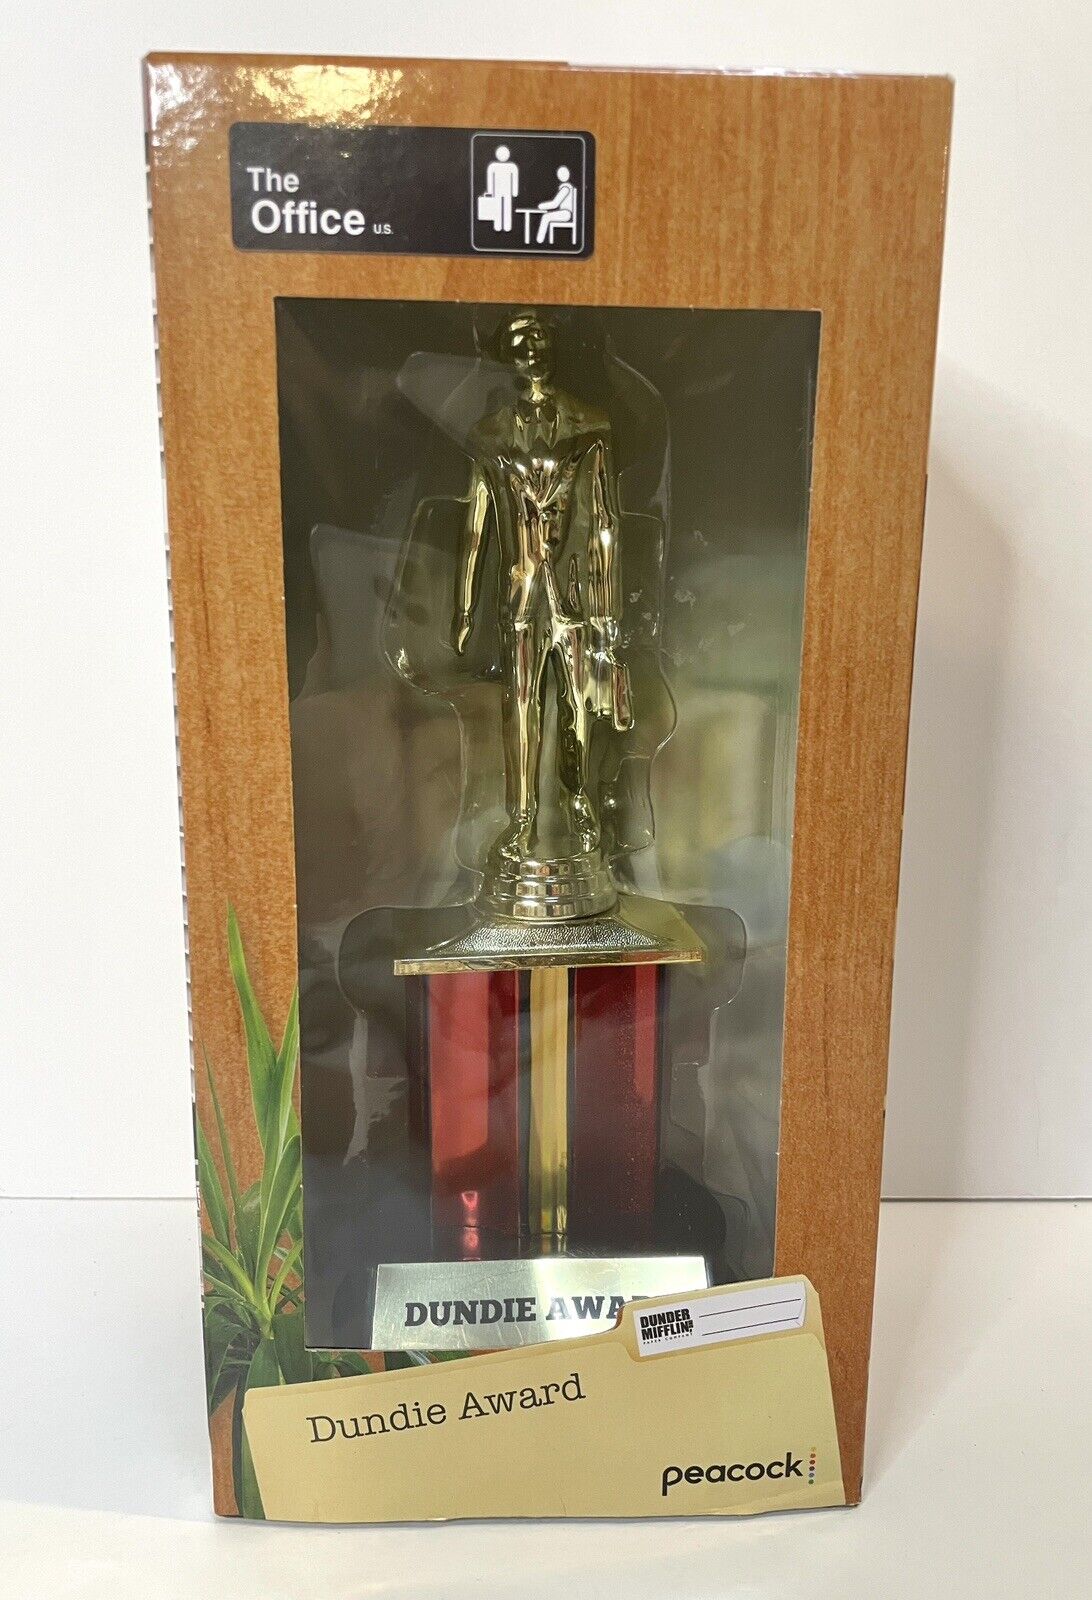 THE OFFICE TV Show Dundie Award TROPHY Figure Peacock NEW Factory Sealed